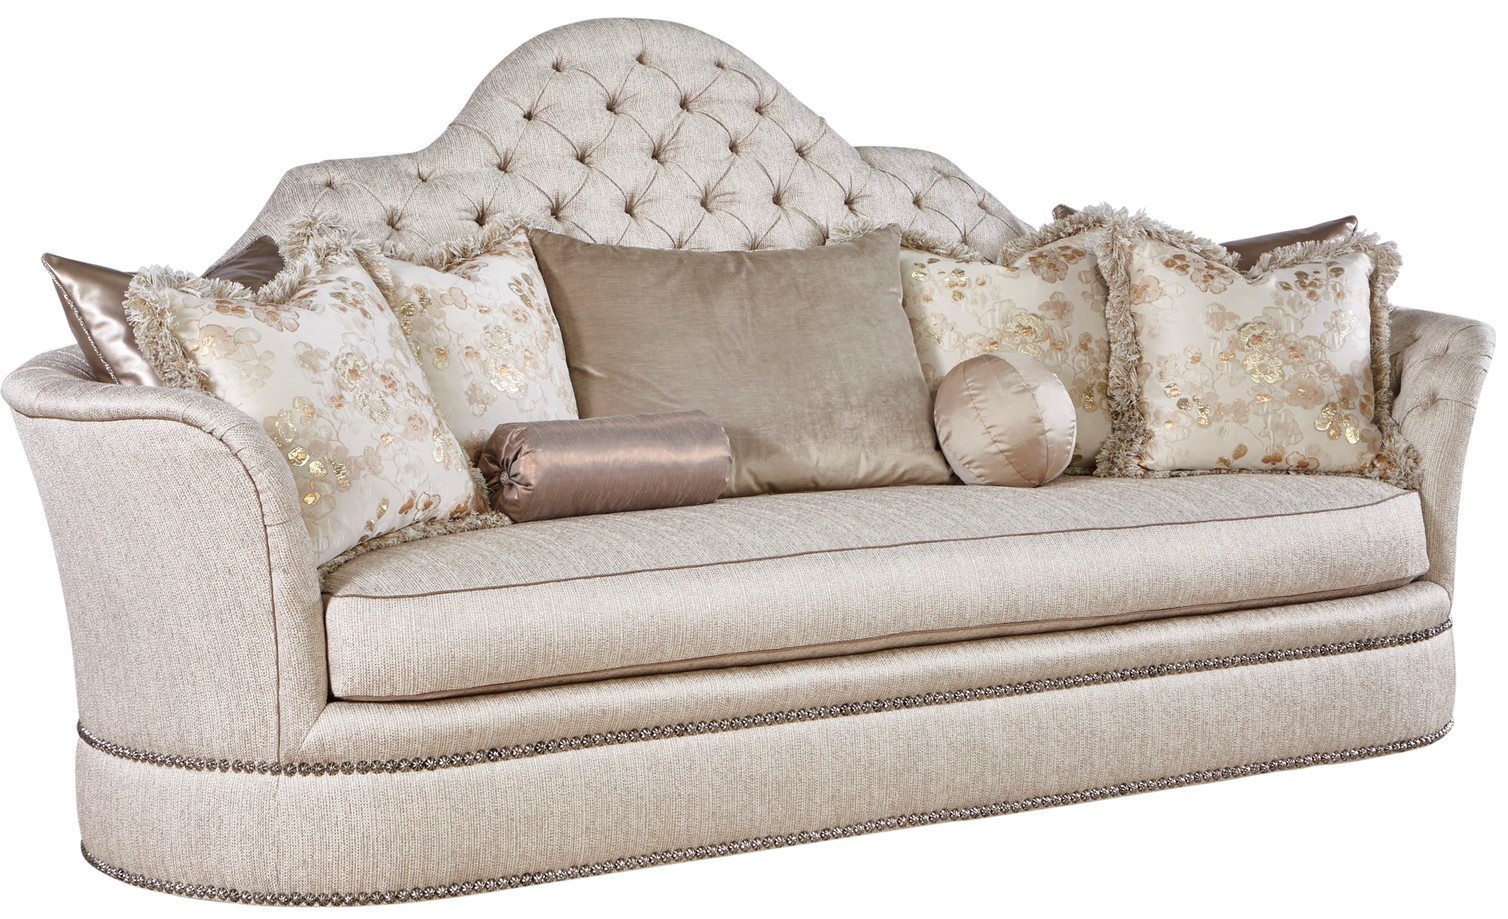 SOFA, COUCH & LOVESEAT Super glam large comfy sofa